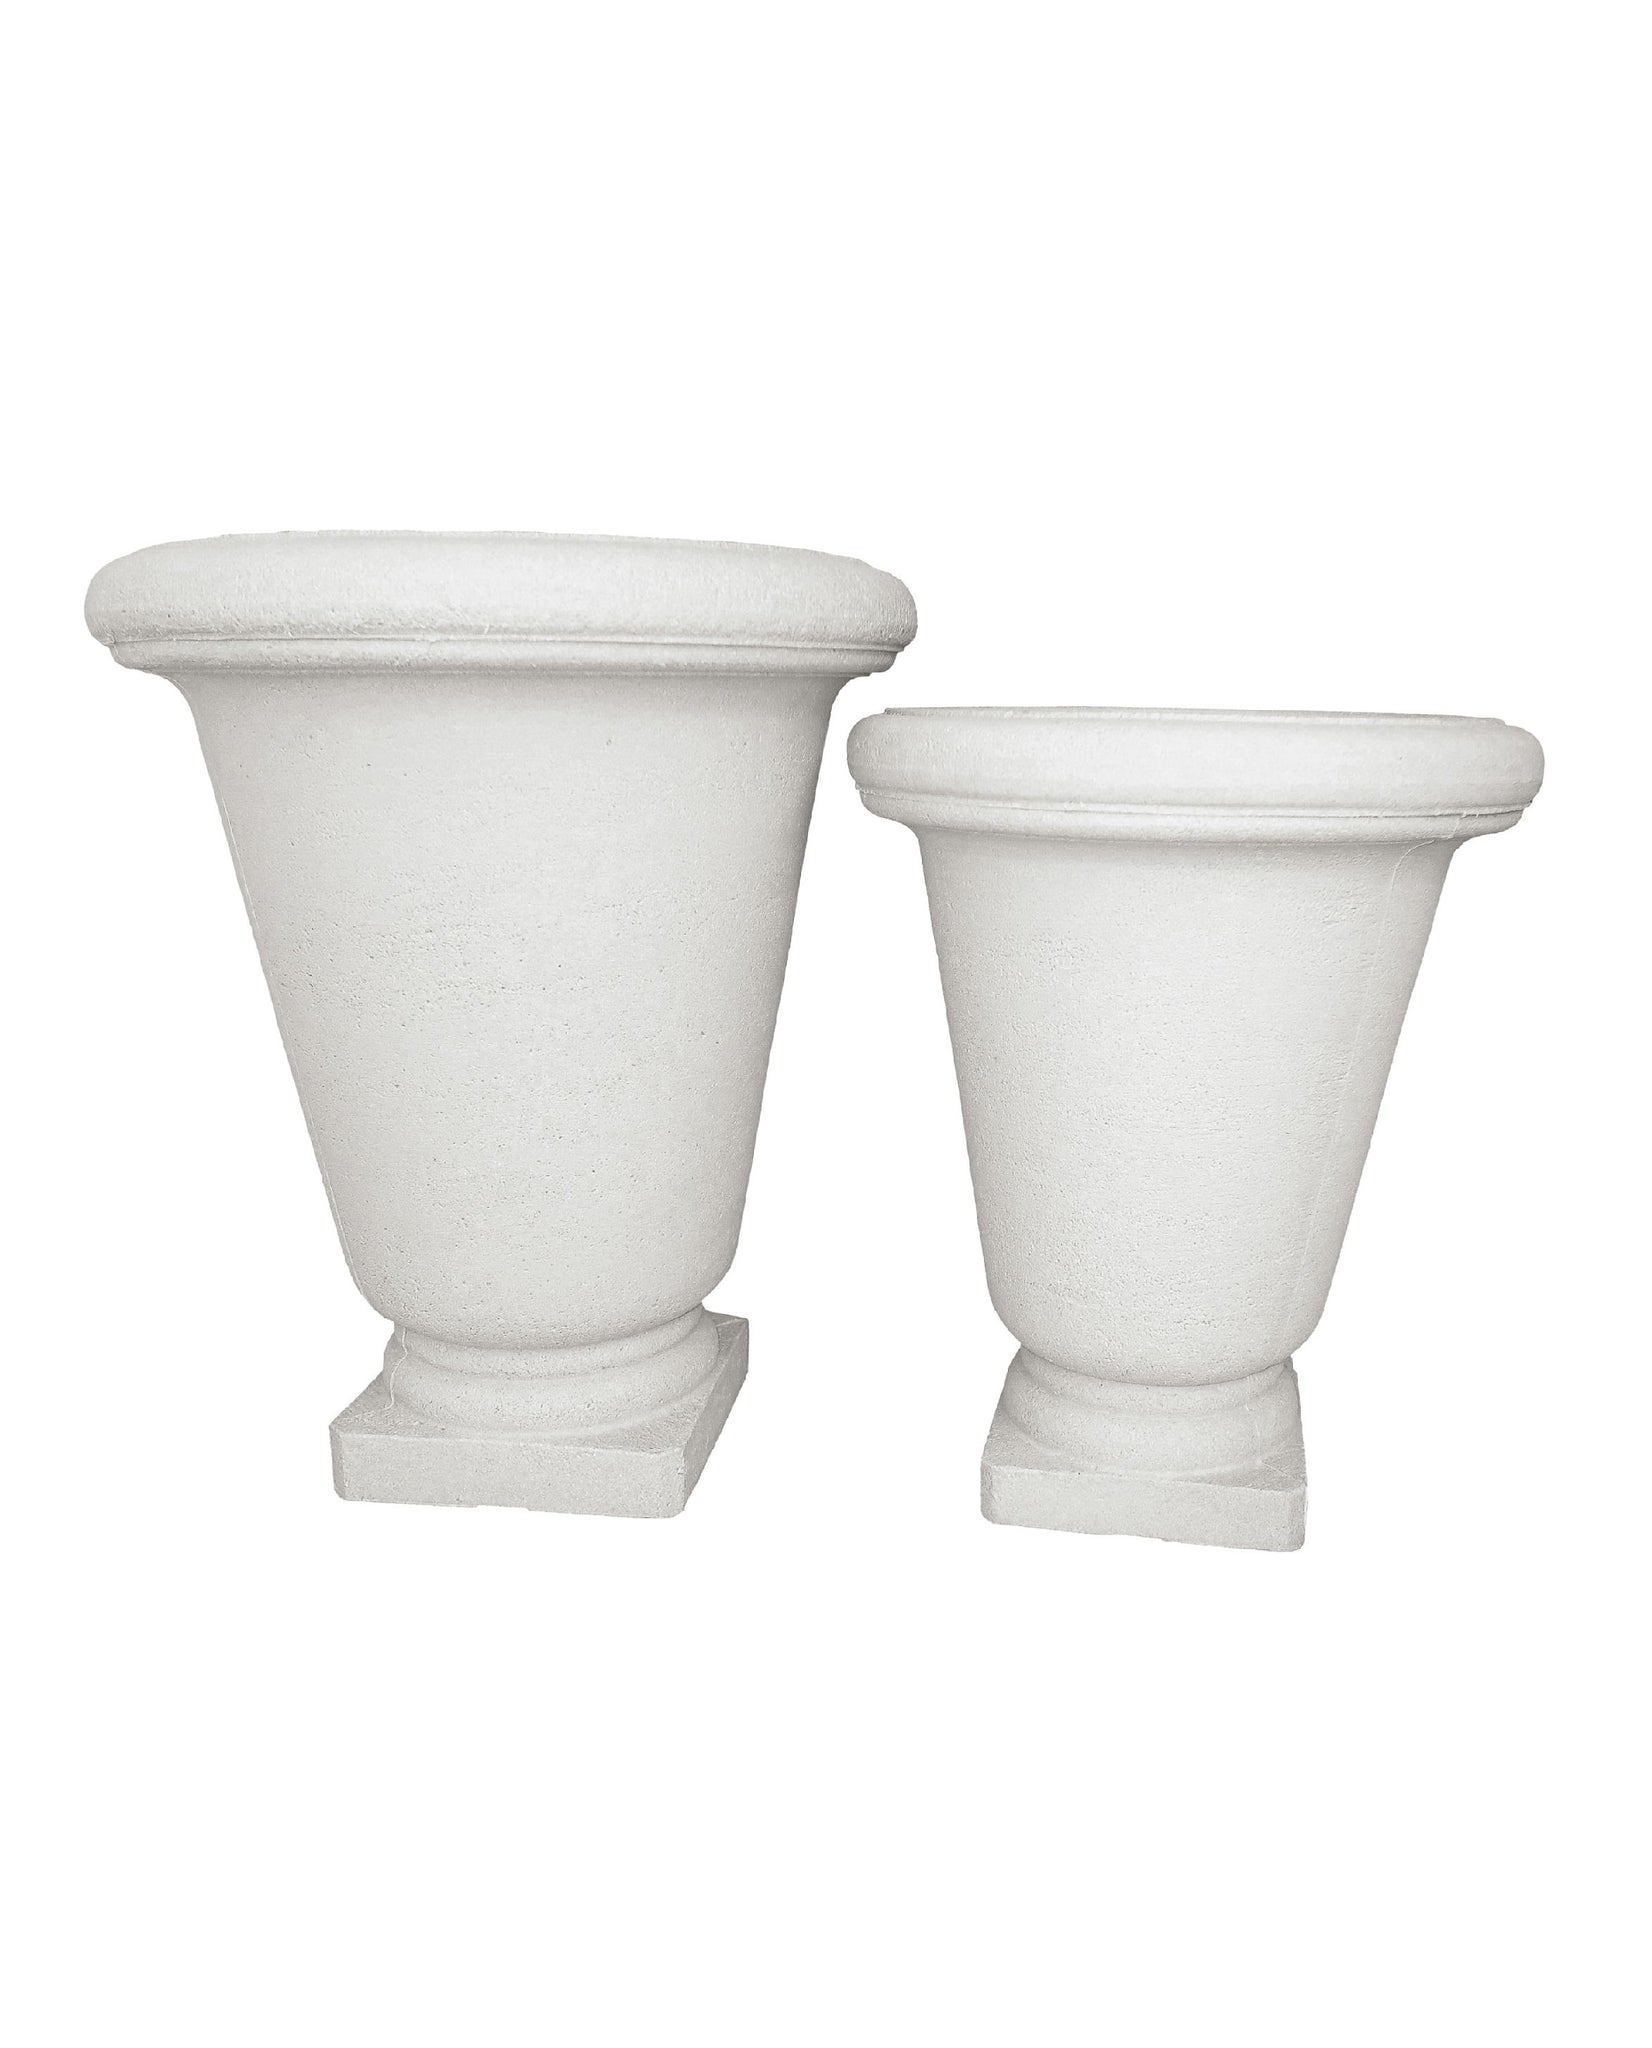 Classic style Japi Planters, Bell Urn in the colour  Off-white.  Large and Medium side by side. Profile view showing off the beautiful urn shape. Florastyle by Hingham.